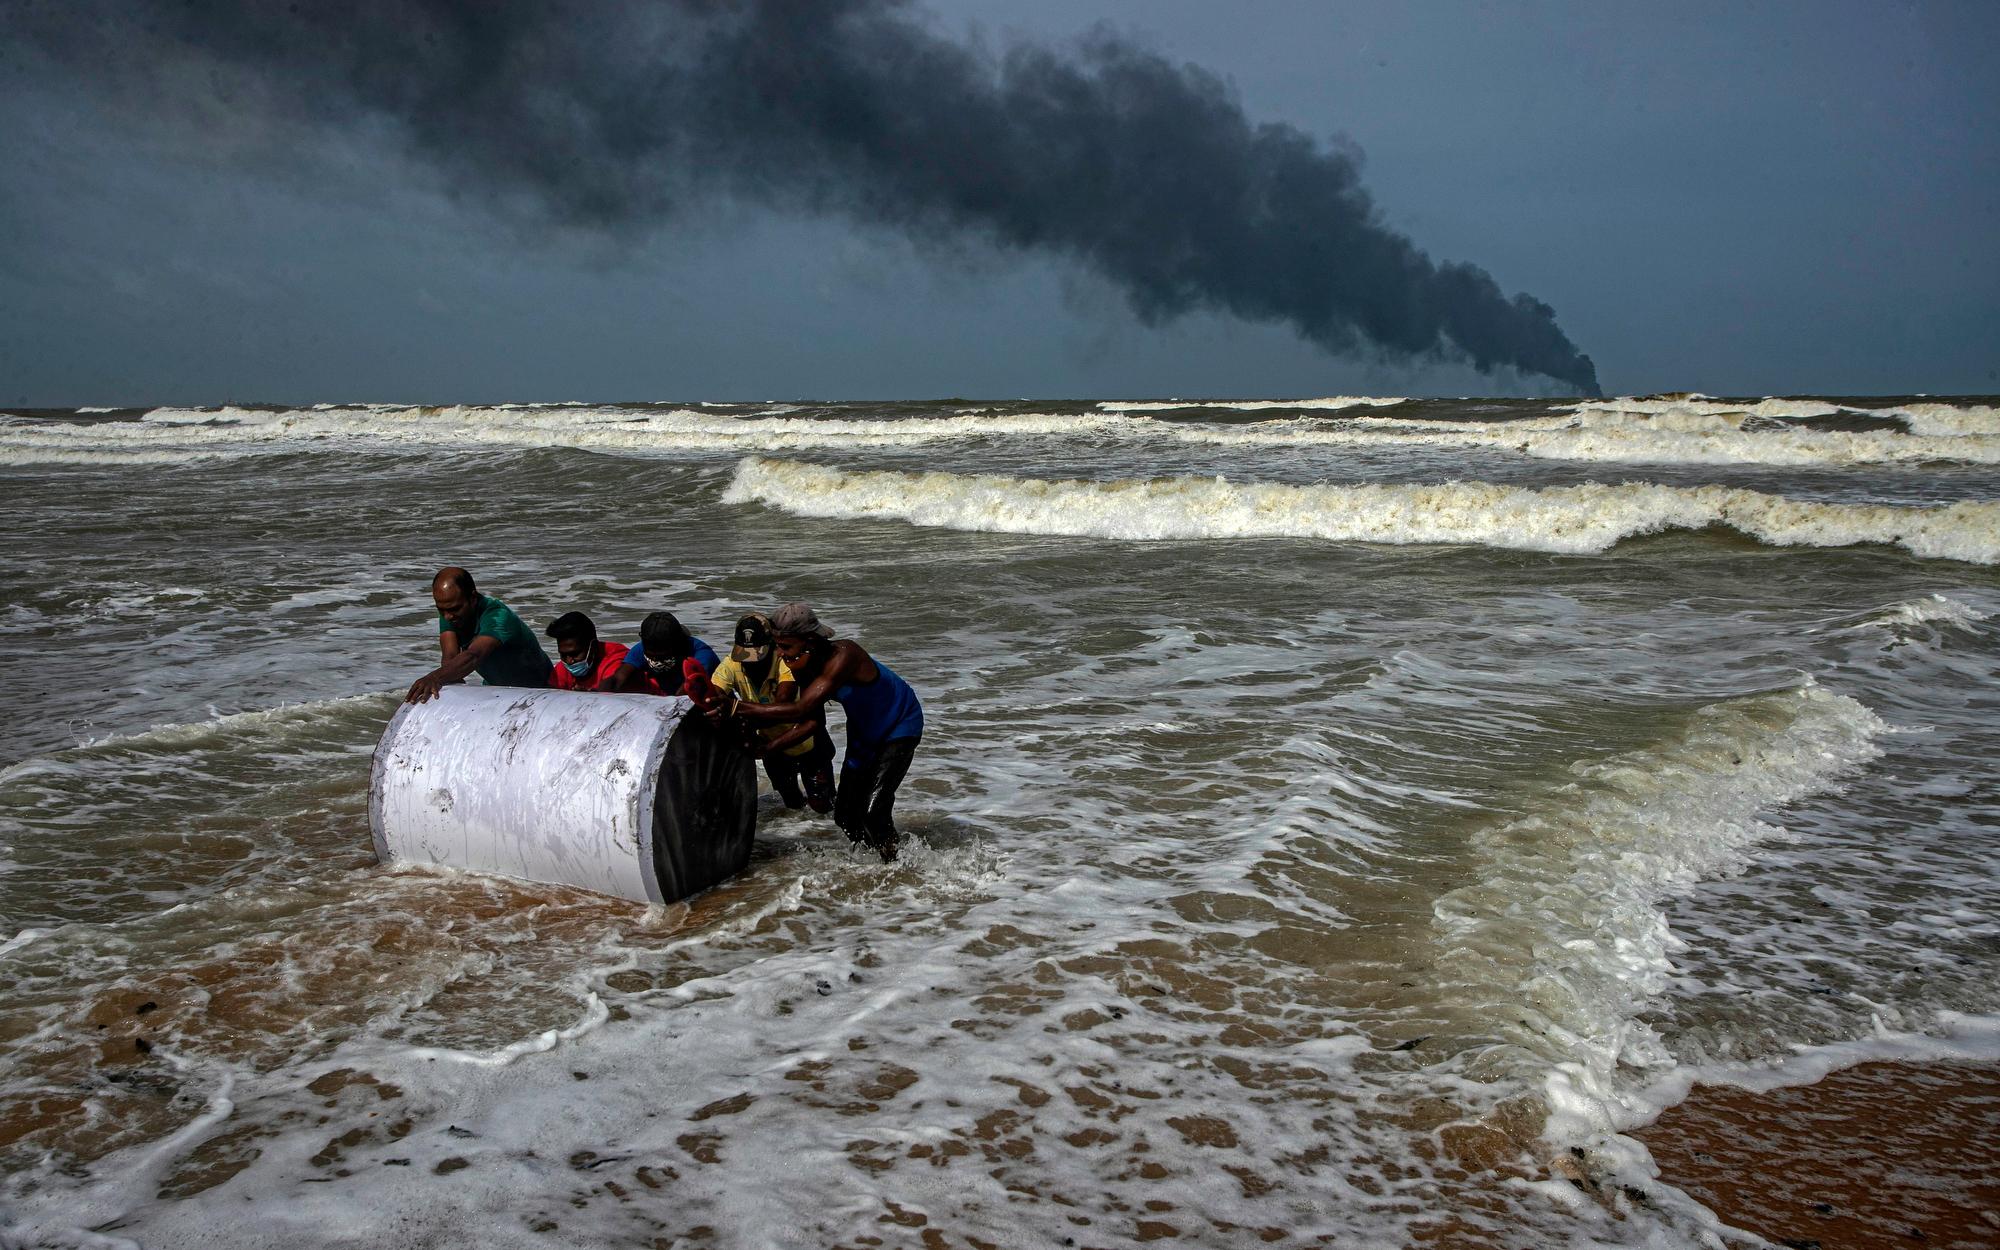 Impoverished Sri Lankans salvage debris that washed ashore on May 26, 2021, from the burning Singaporean ship X-Press Pearl, which caught fire several days earlier off the coast of Colombo, Sri Lanka. (AP Photo/Eranga Jayawardena)